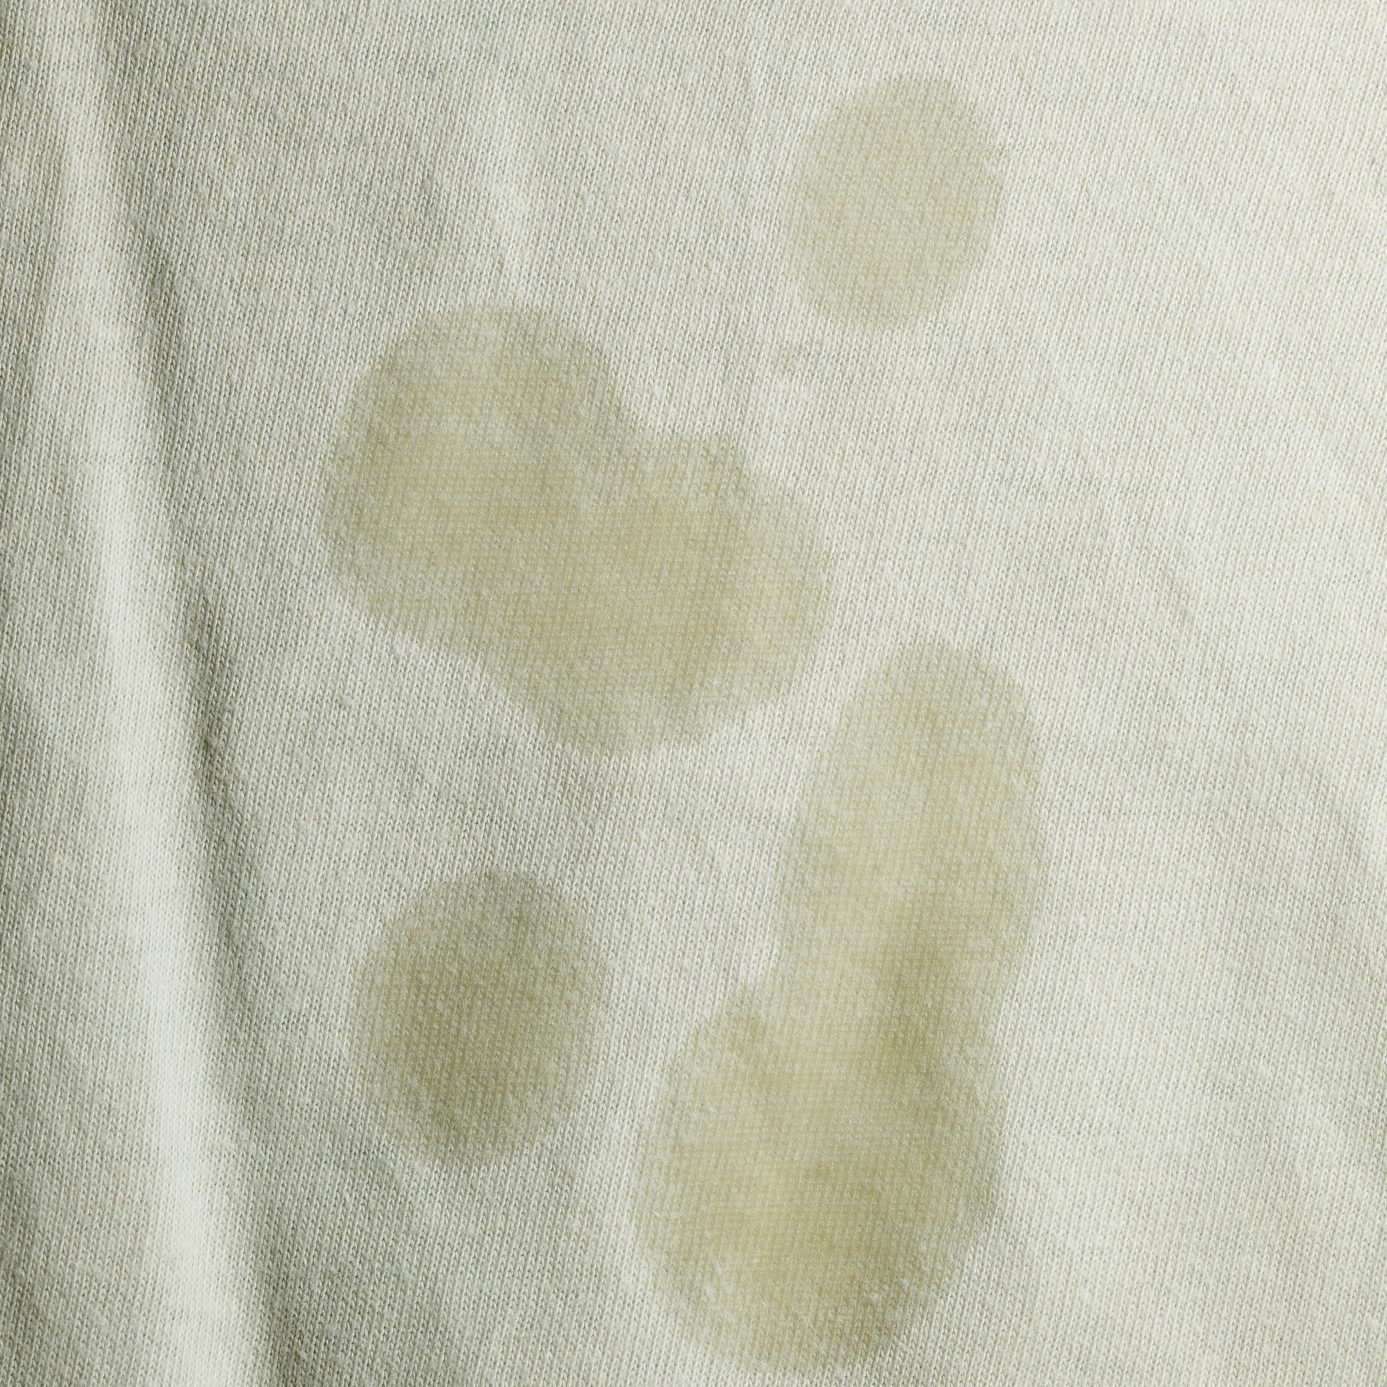 How To Get Laundry Detergent Stains Out of Clothes